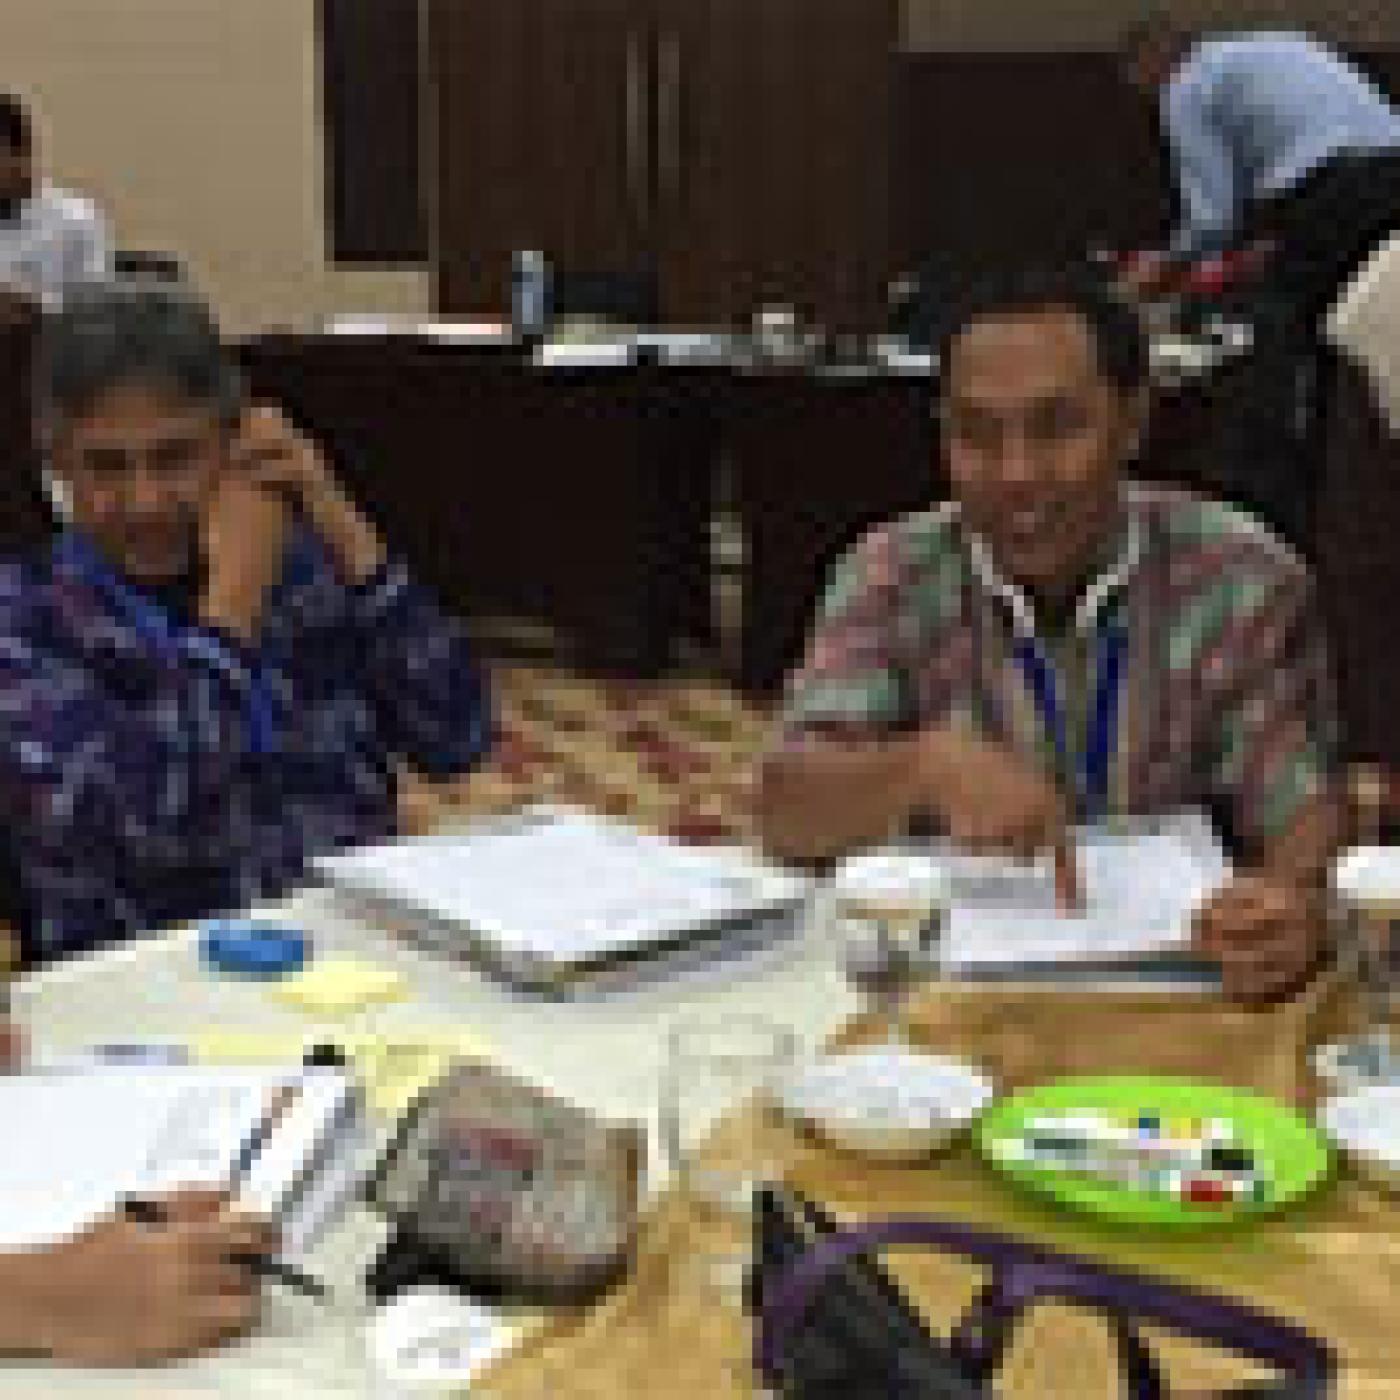 Participants discuss practical solutions to potential Election Day problems at the AGENDA Disability Rights and Elections Training in Bogor, Indonesia, from April 6-7, 2016.